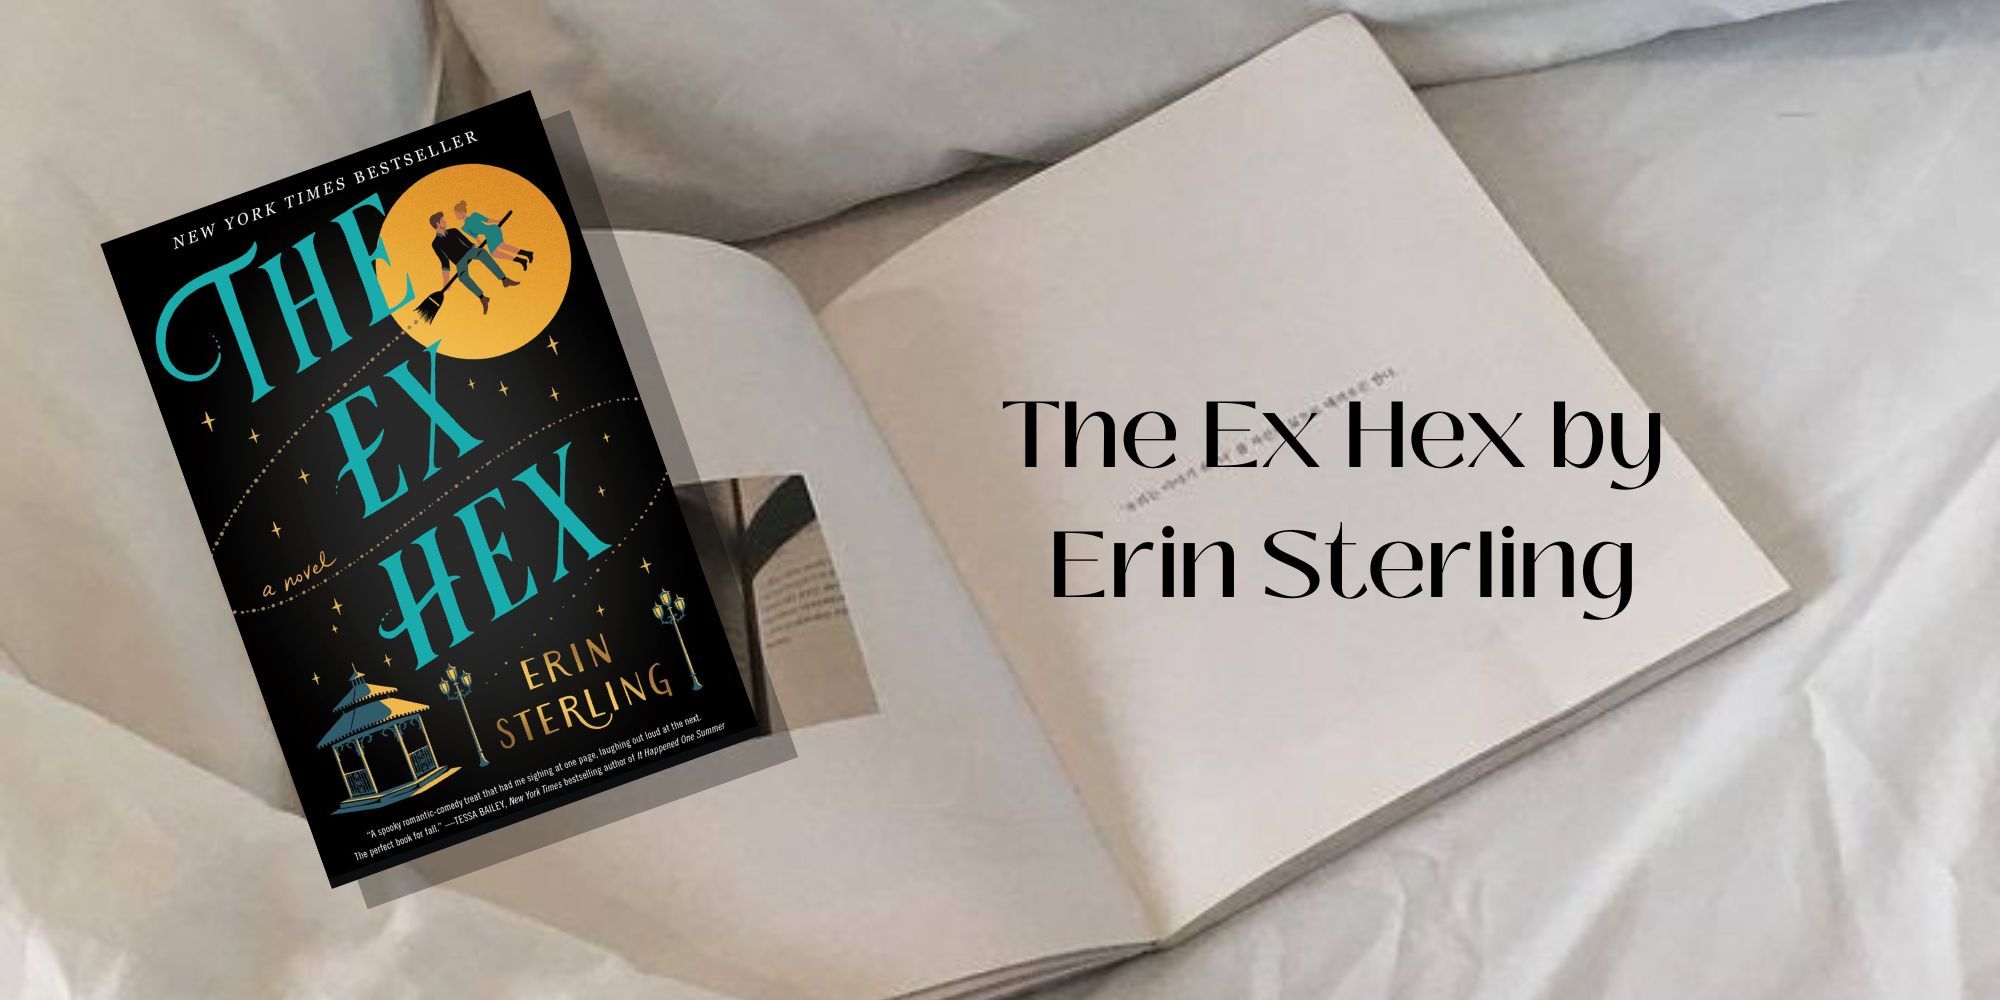 The cover of The Ex Hex by Erin Sterling